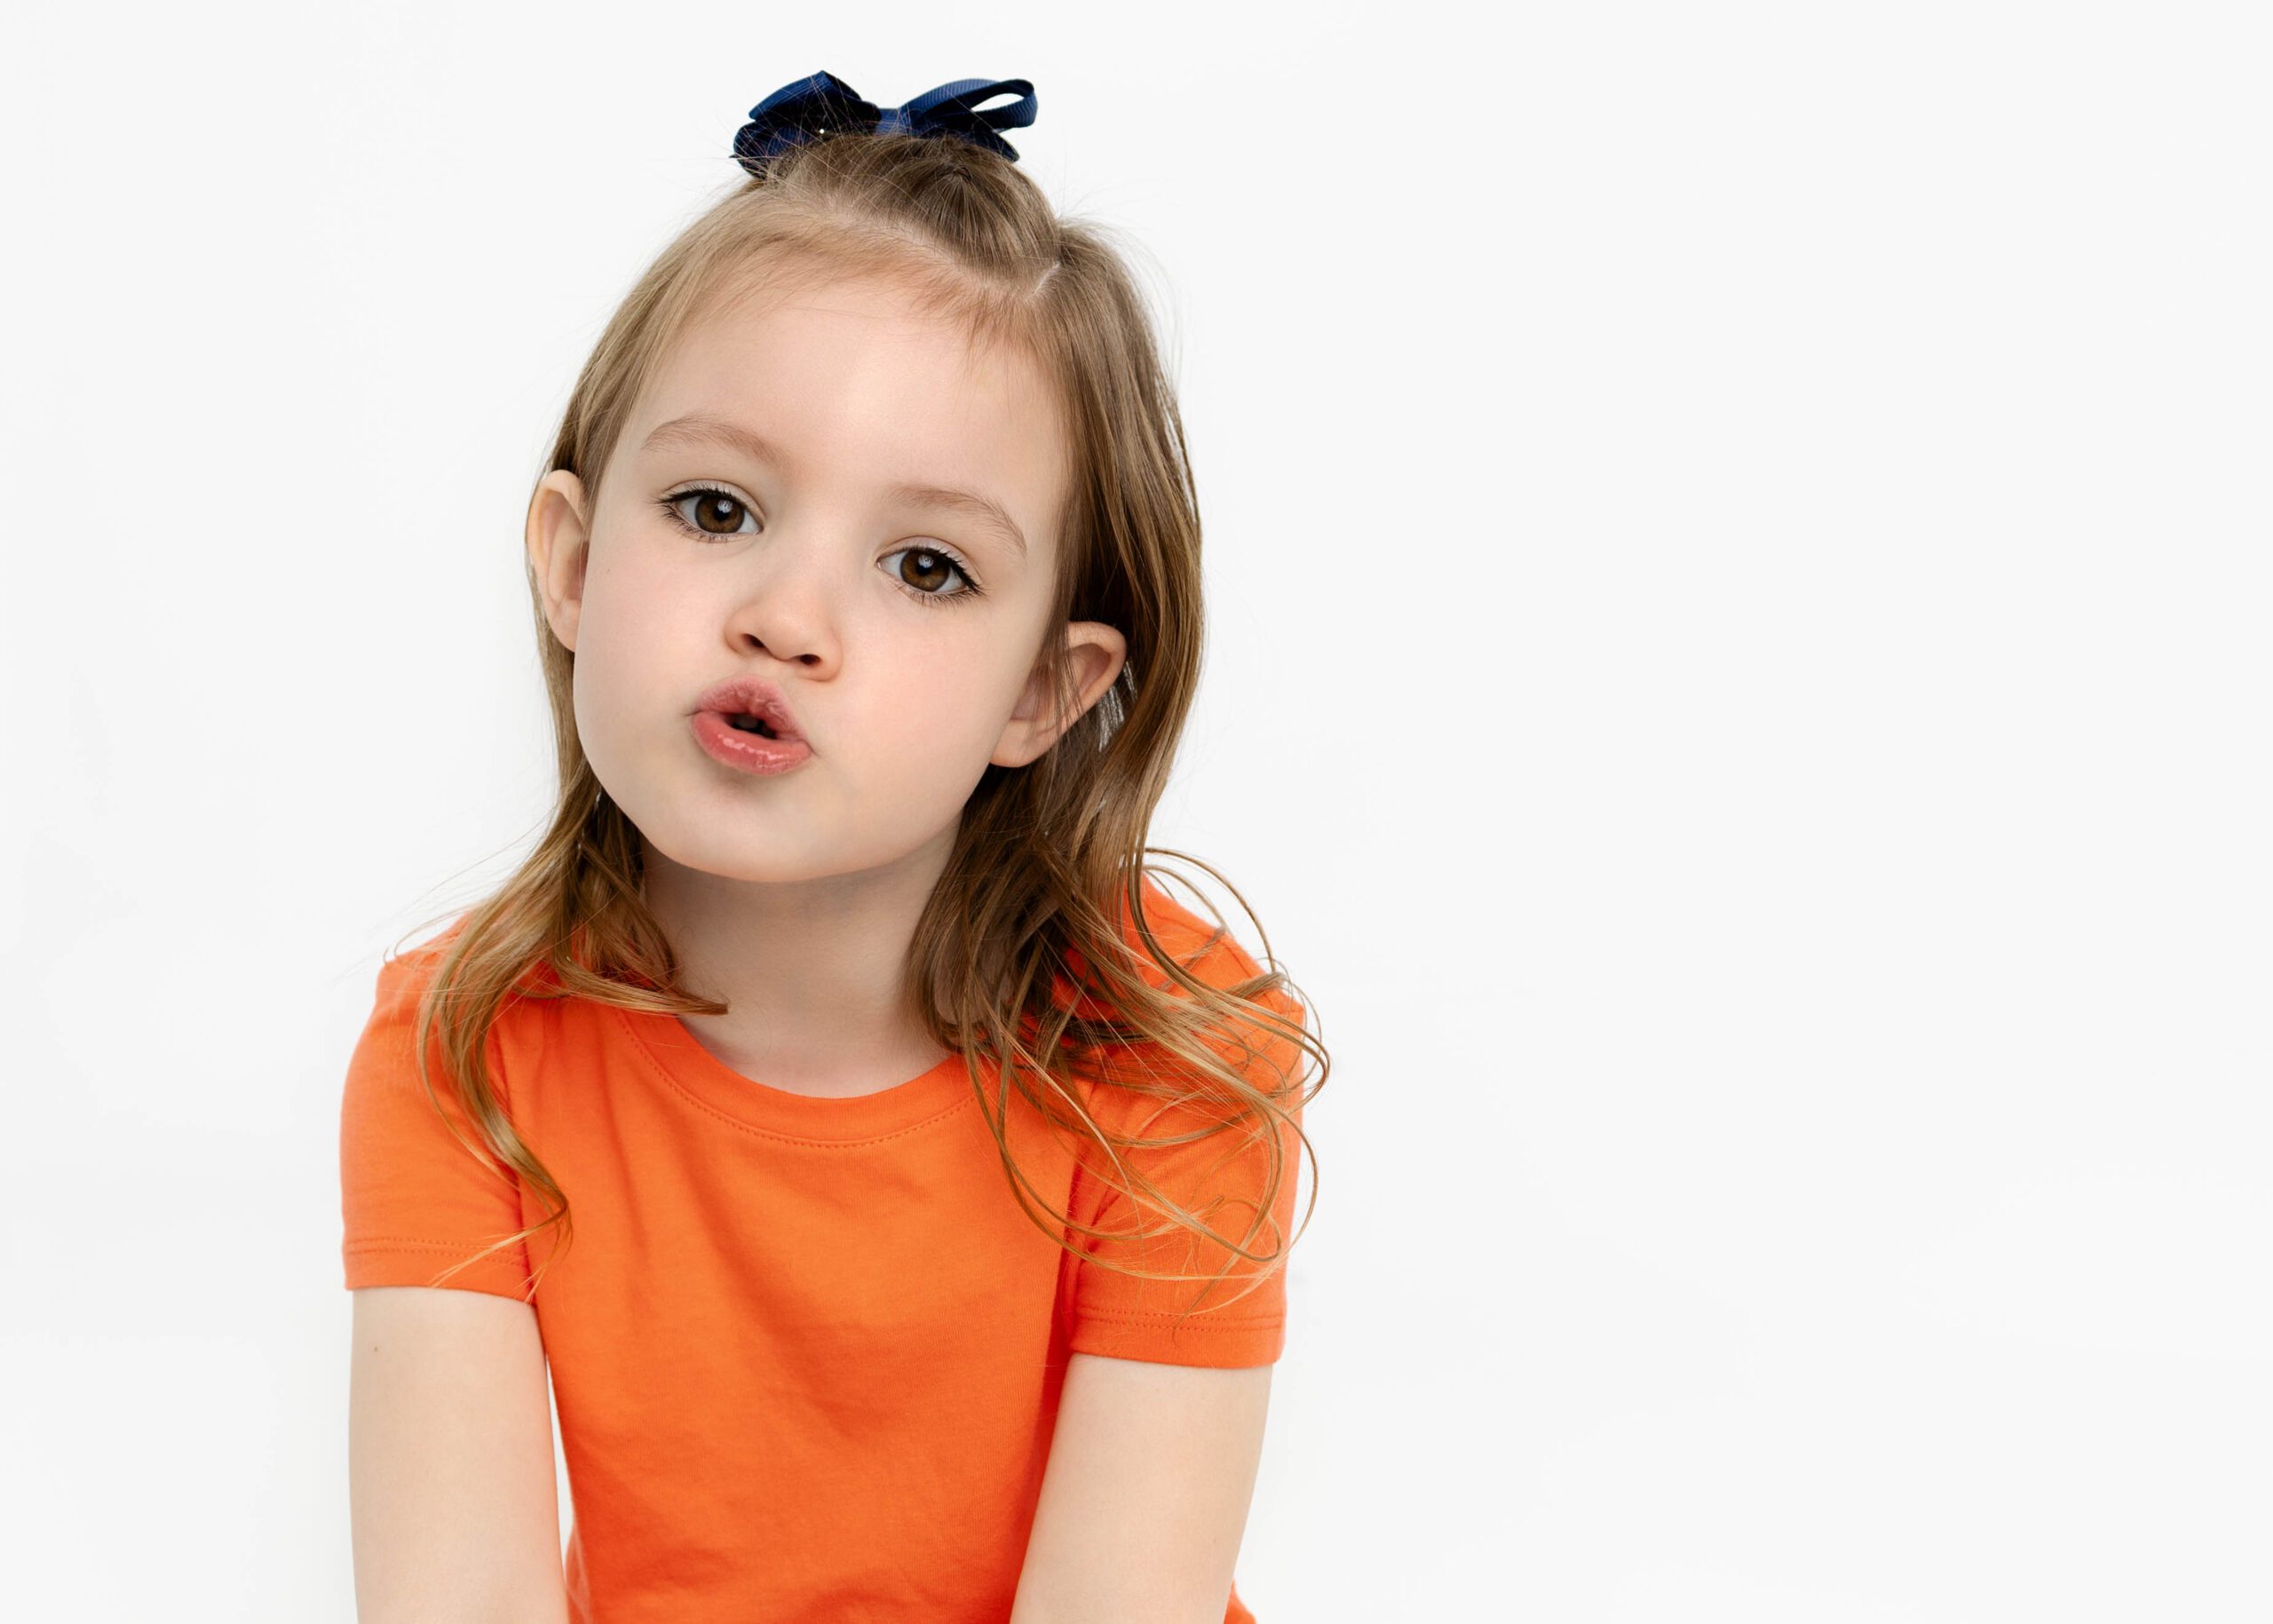 Little girl with orange dress on making a funny face by white studio photography